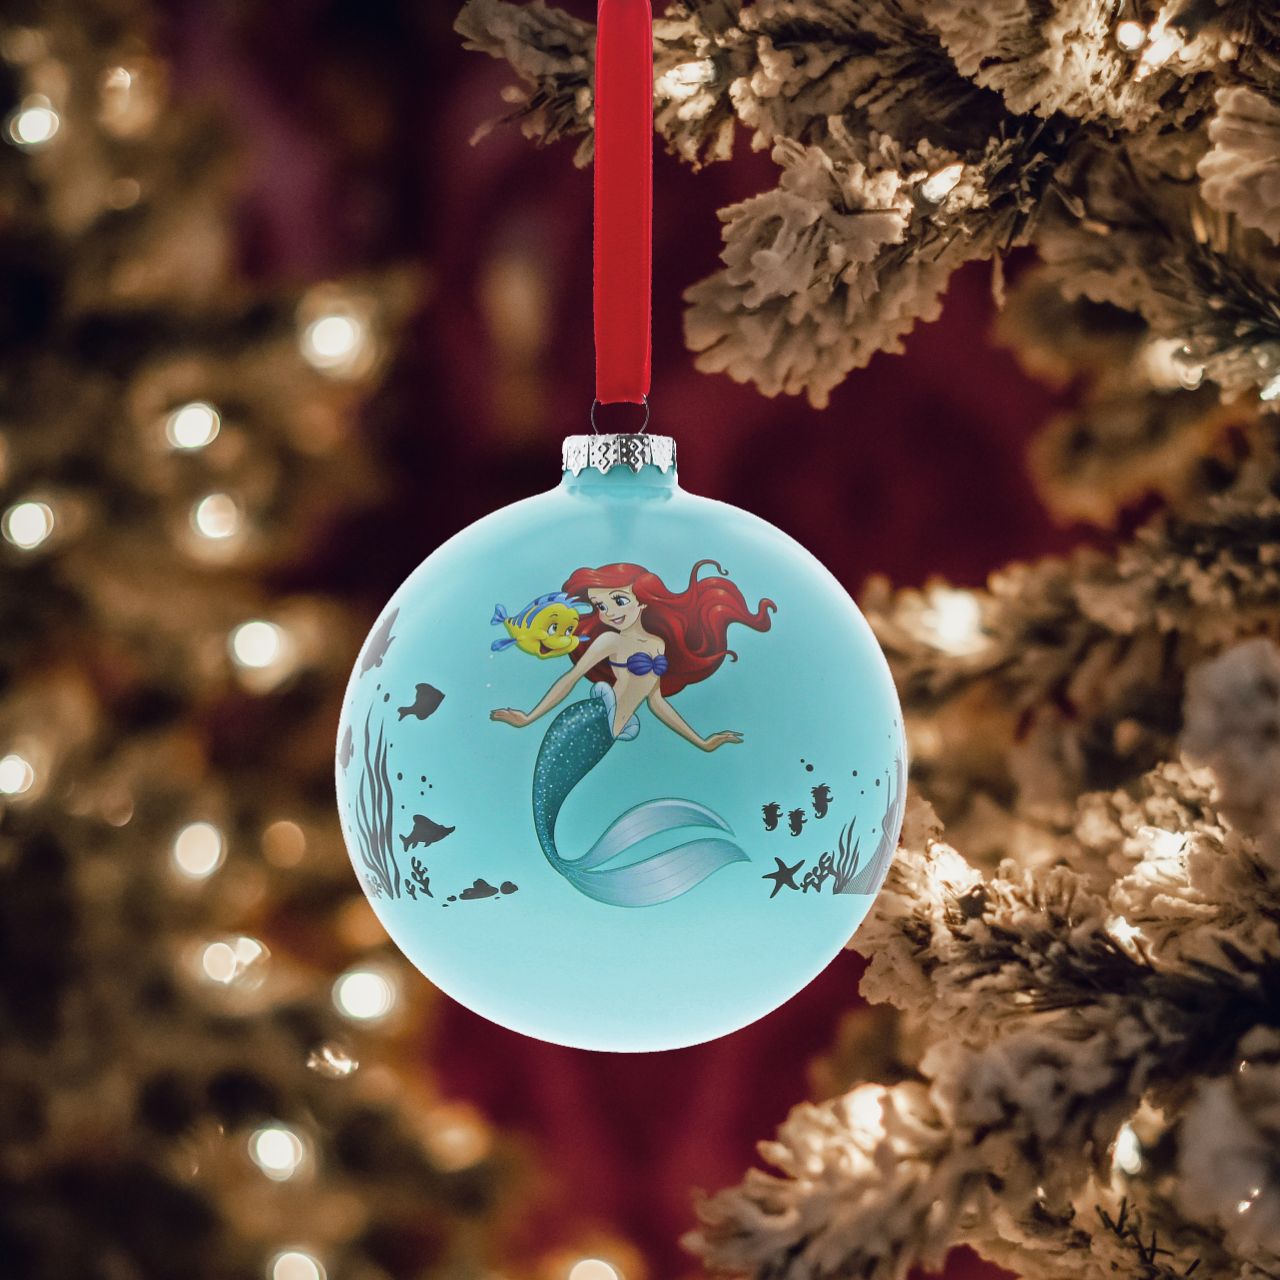 Disney Christmas Bauble The Little Mermaid Life is Bubbles  Ariel swims under the sea with Flounder in this beautiful glass bauble. This Little Mermaid treasured keepsake would make a lovely unique gift for a friend, or a self-purchase to brighten up the home.